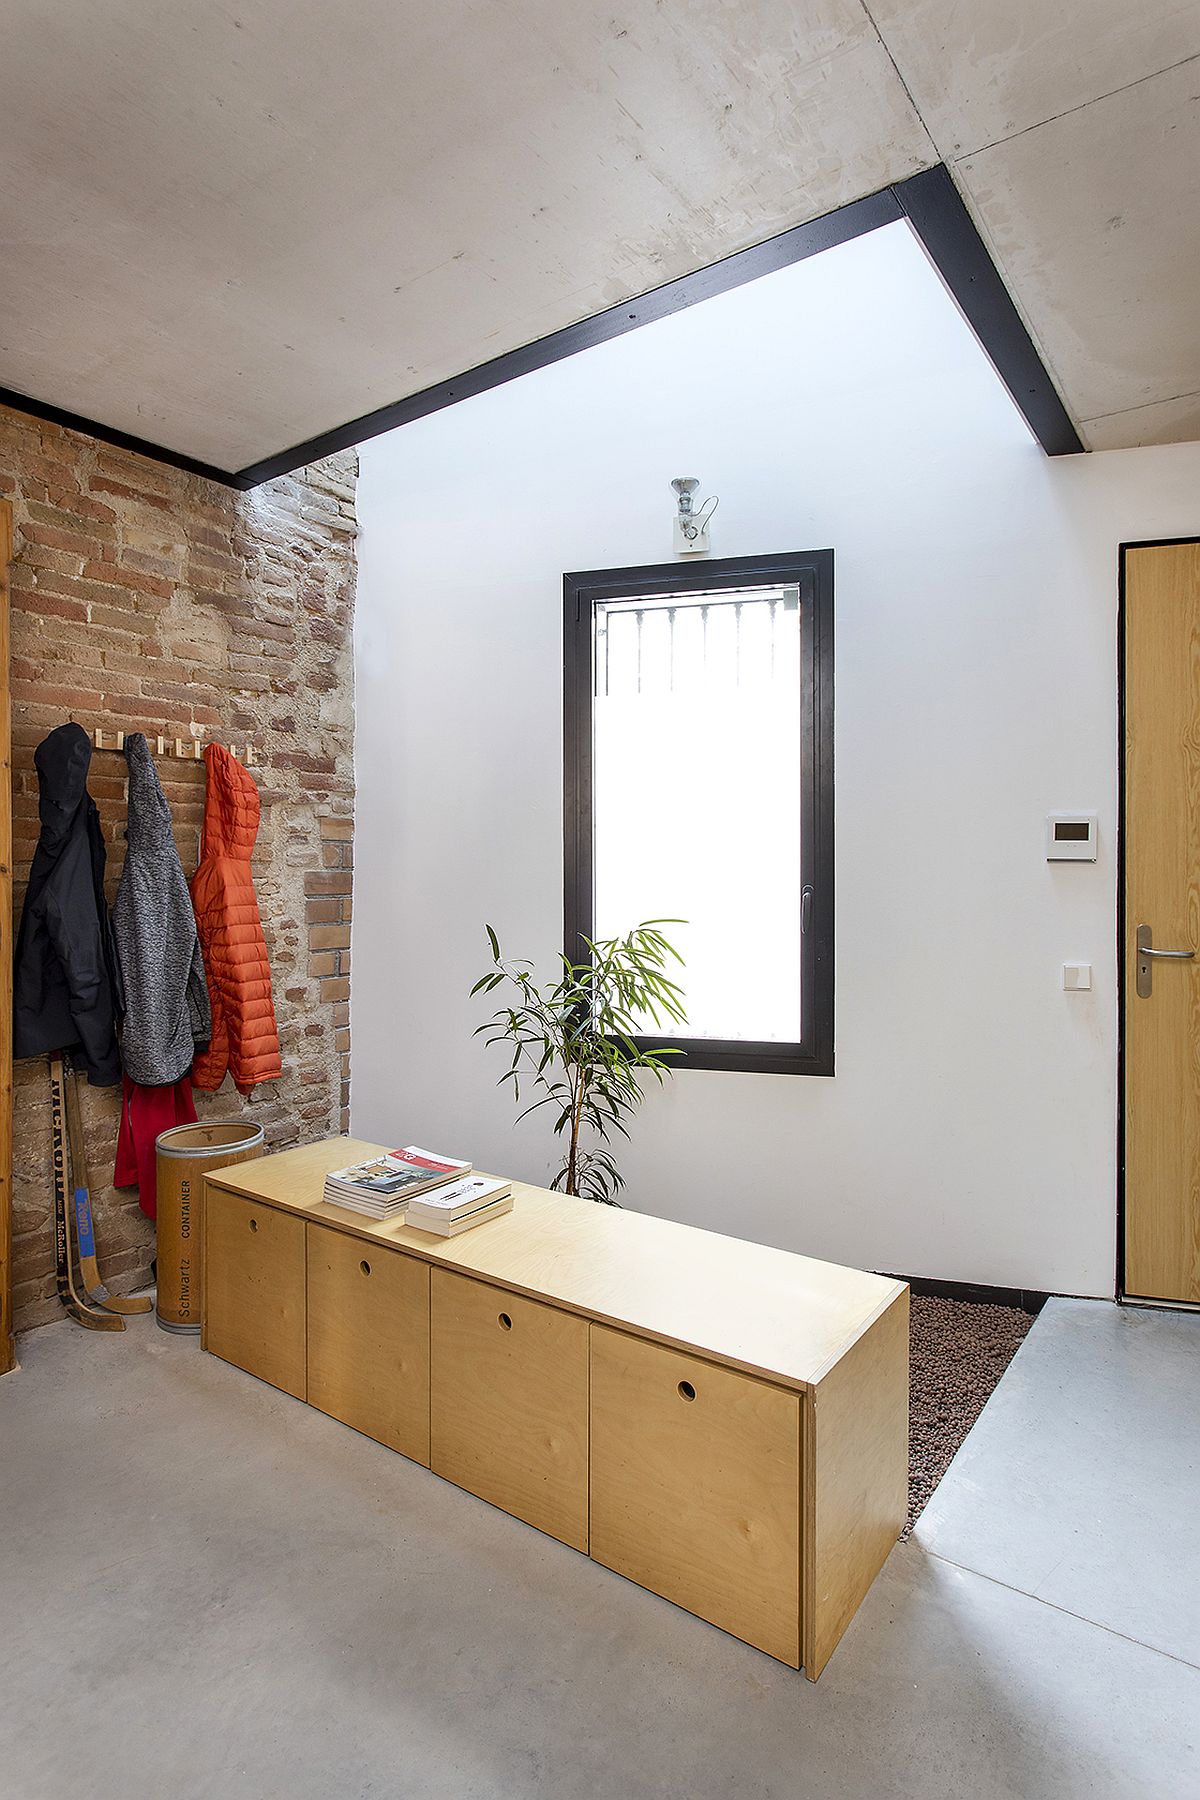 Skylight brings natural light into the entry in white, brick and wood